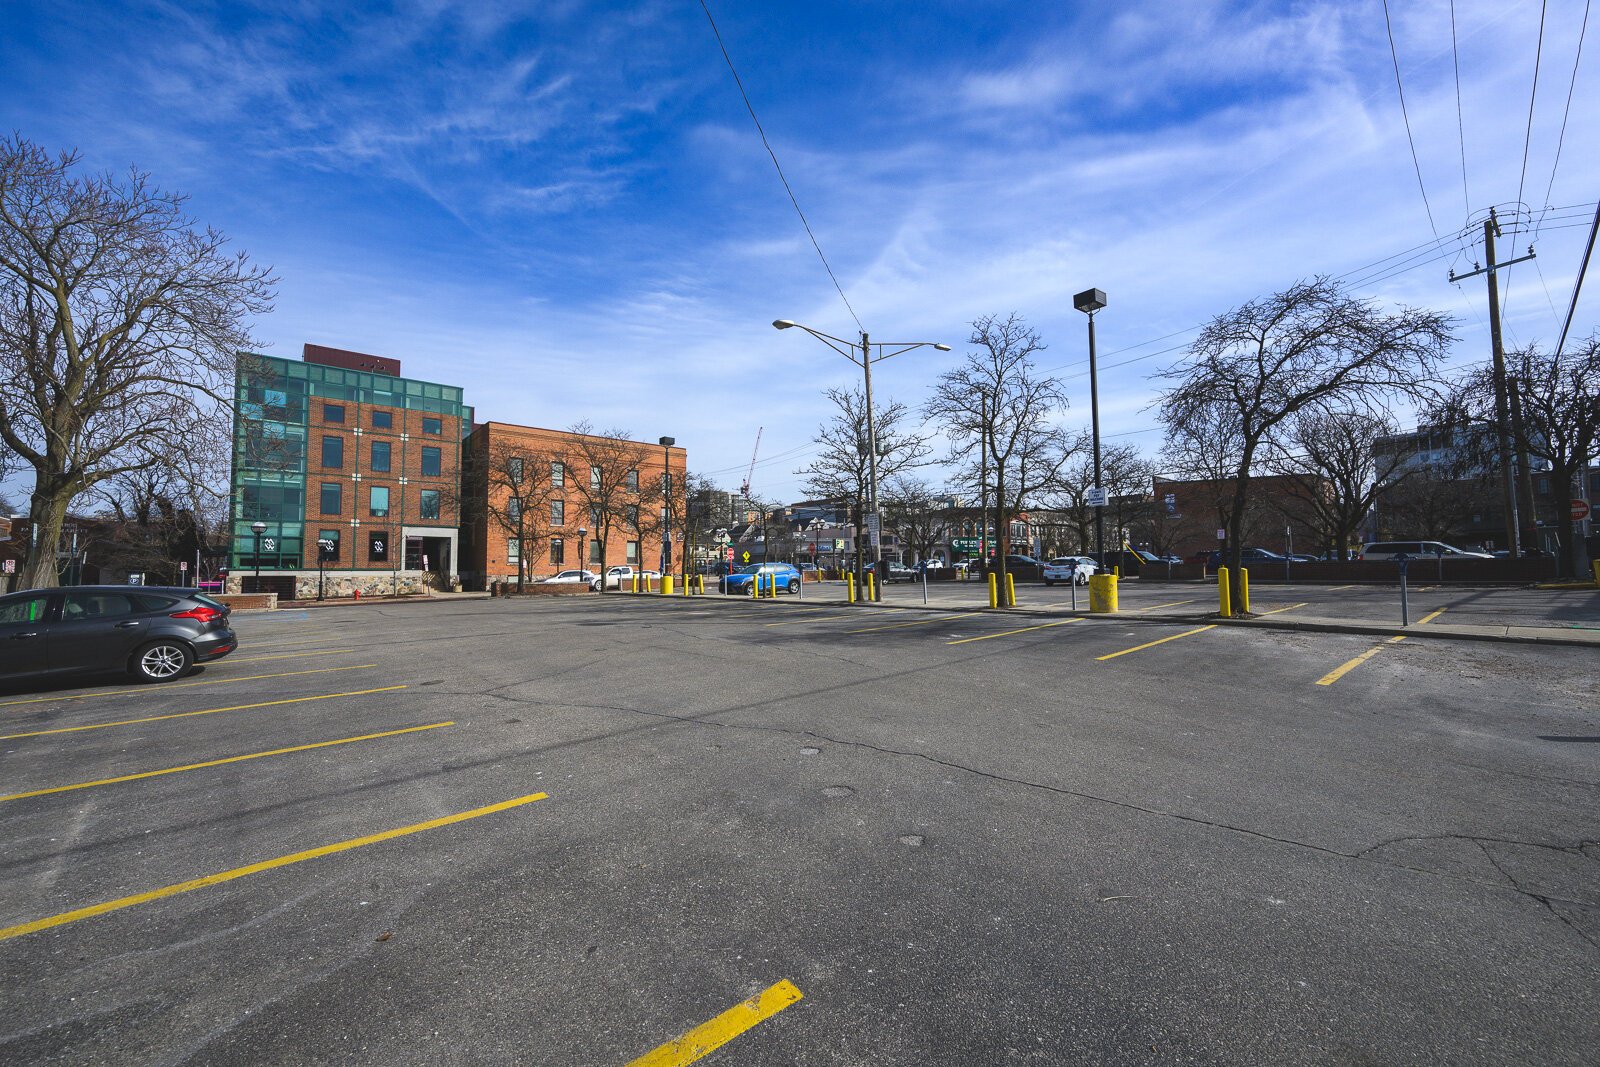 Site of the future development at 121 Catherine Street in Ann Arbor.